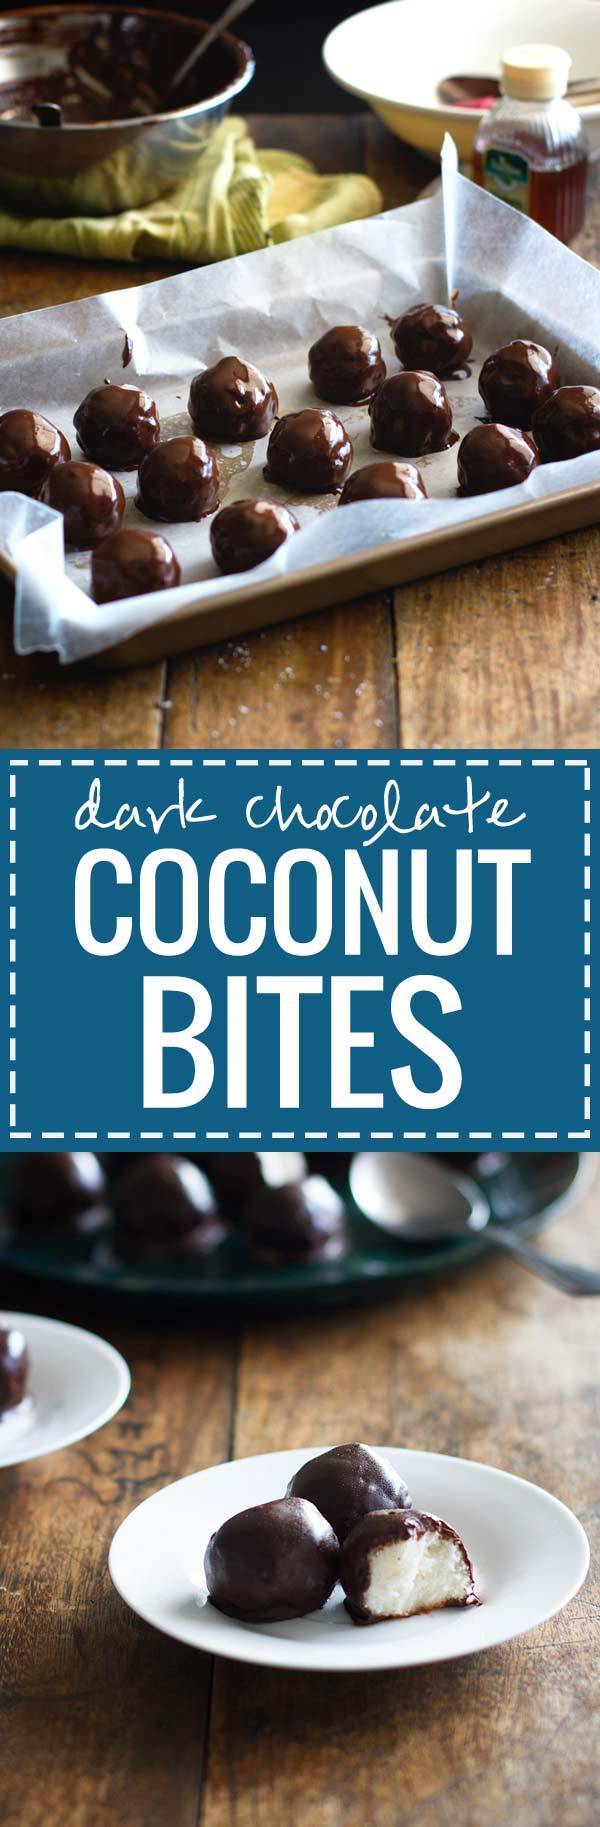 Dark Chocolate Coconut Bites - These dark chocolate coconut bites look like cute truffles and require just four ingredients. 130 calories of natural sweetness.